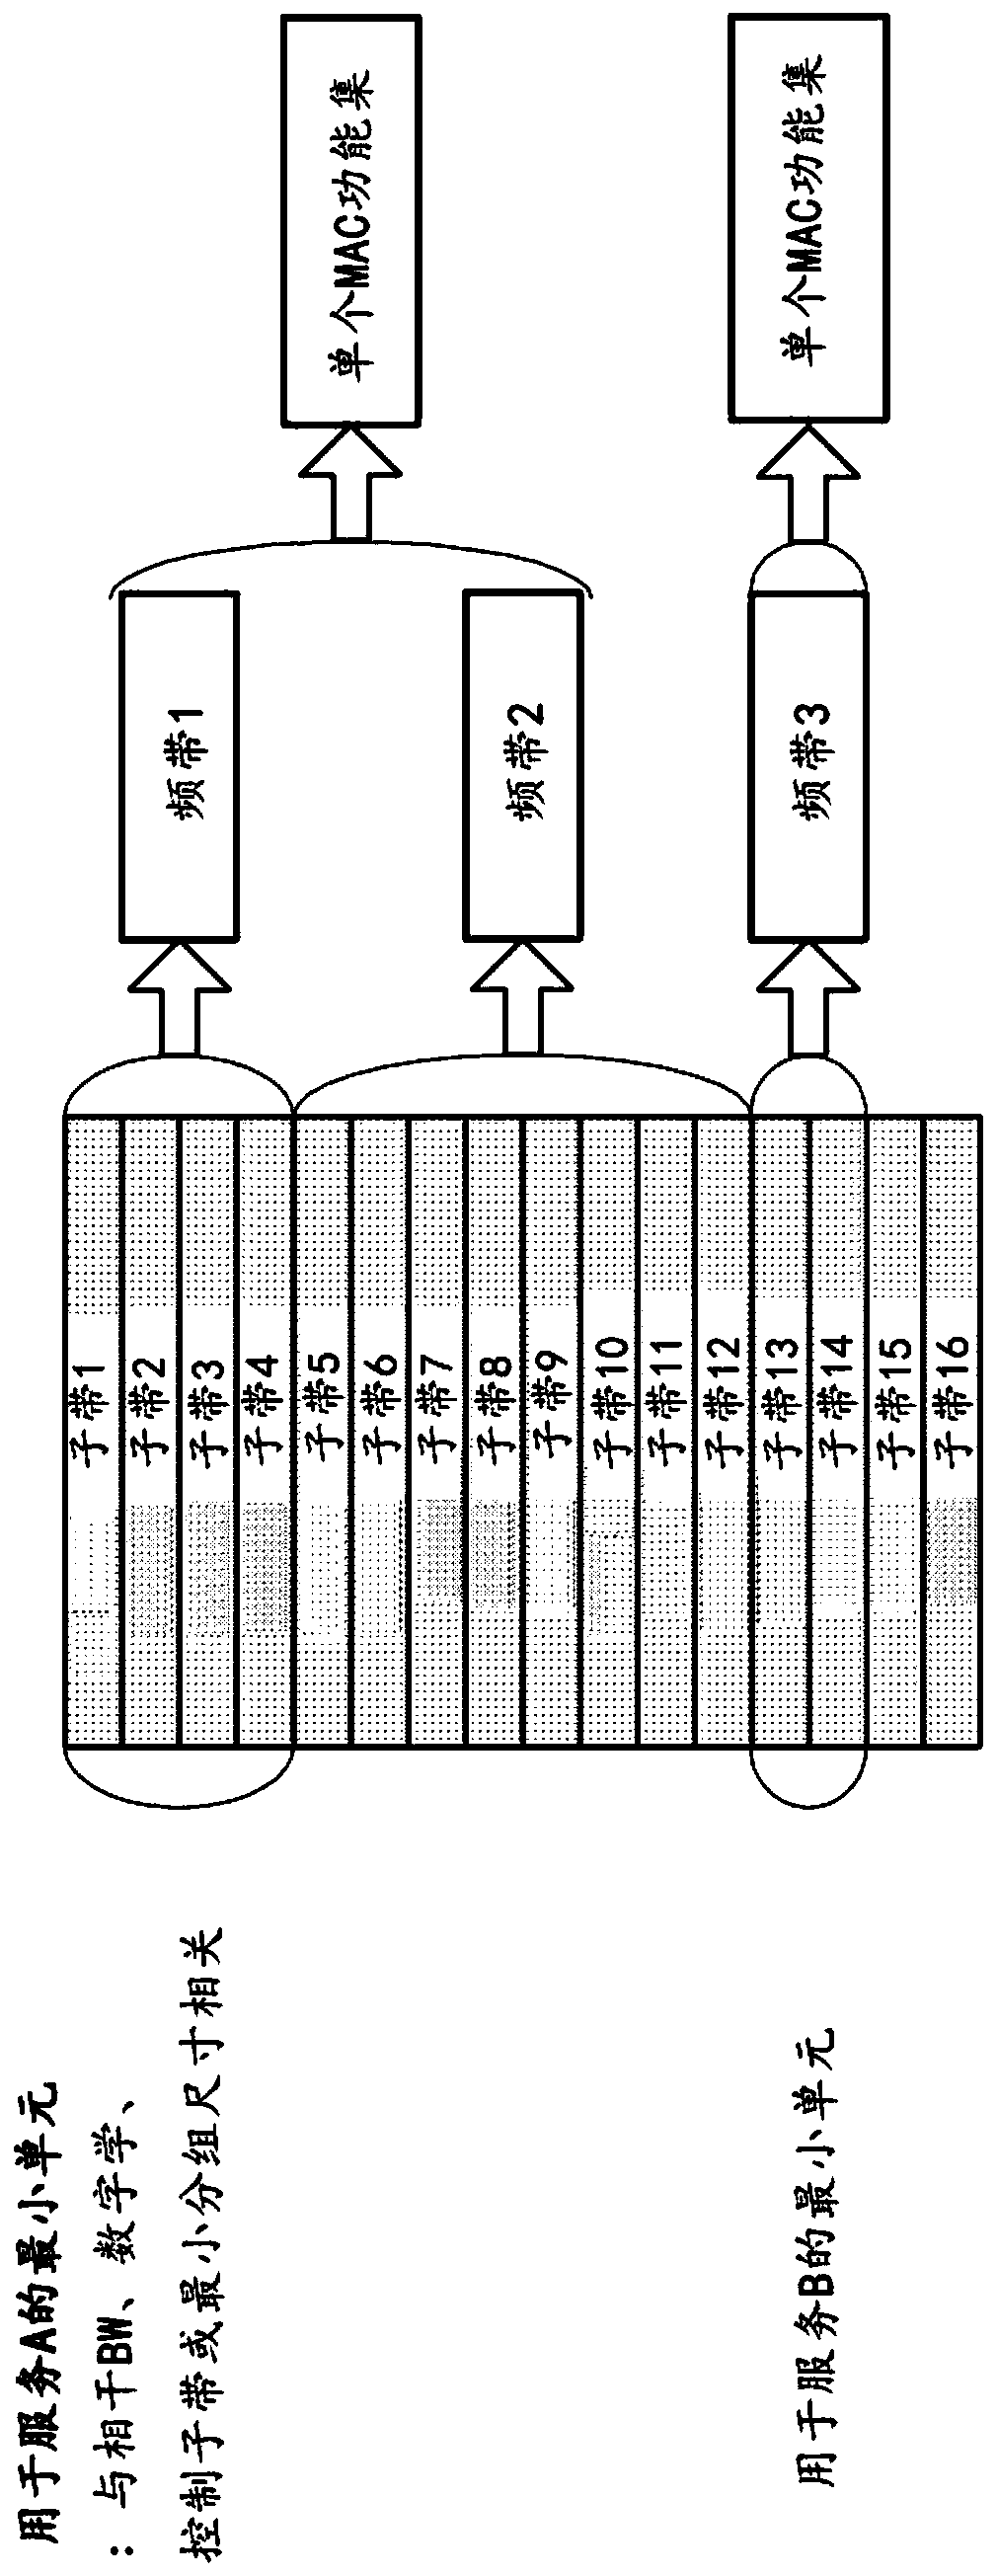 Apparatus and method to support ultra-wide bandwidth in fifth generation (5G) new radio